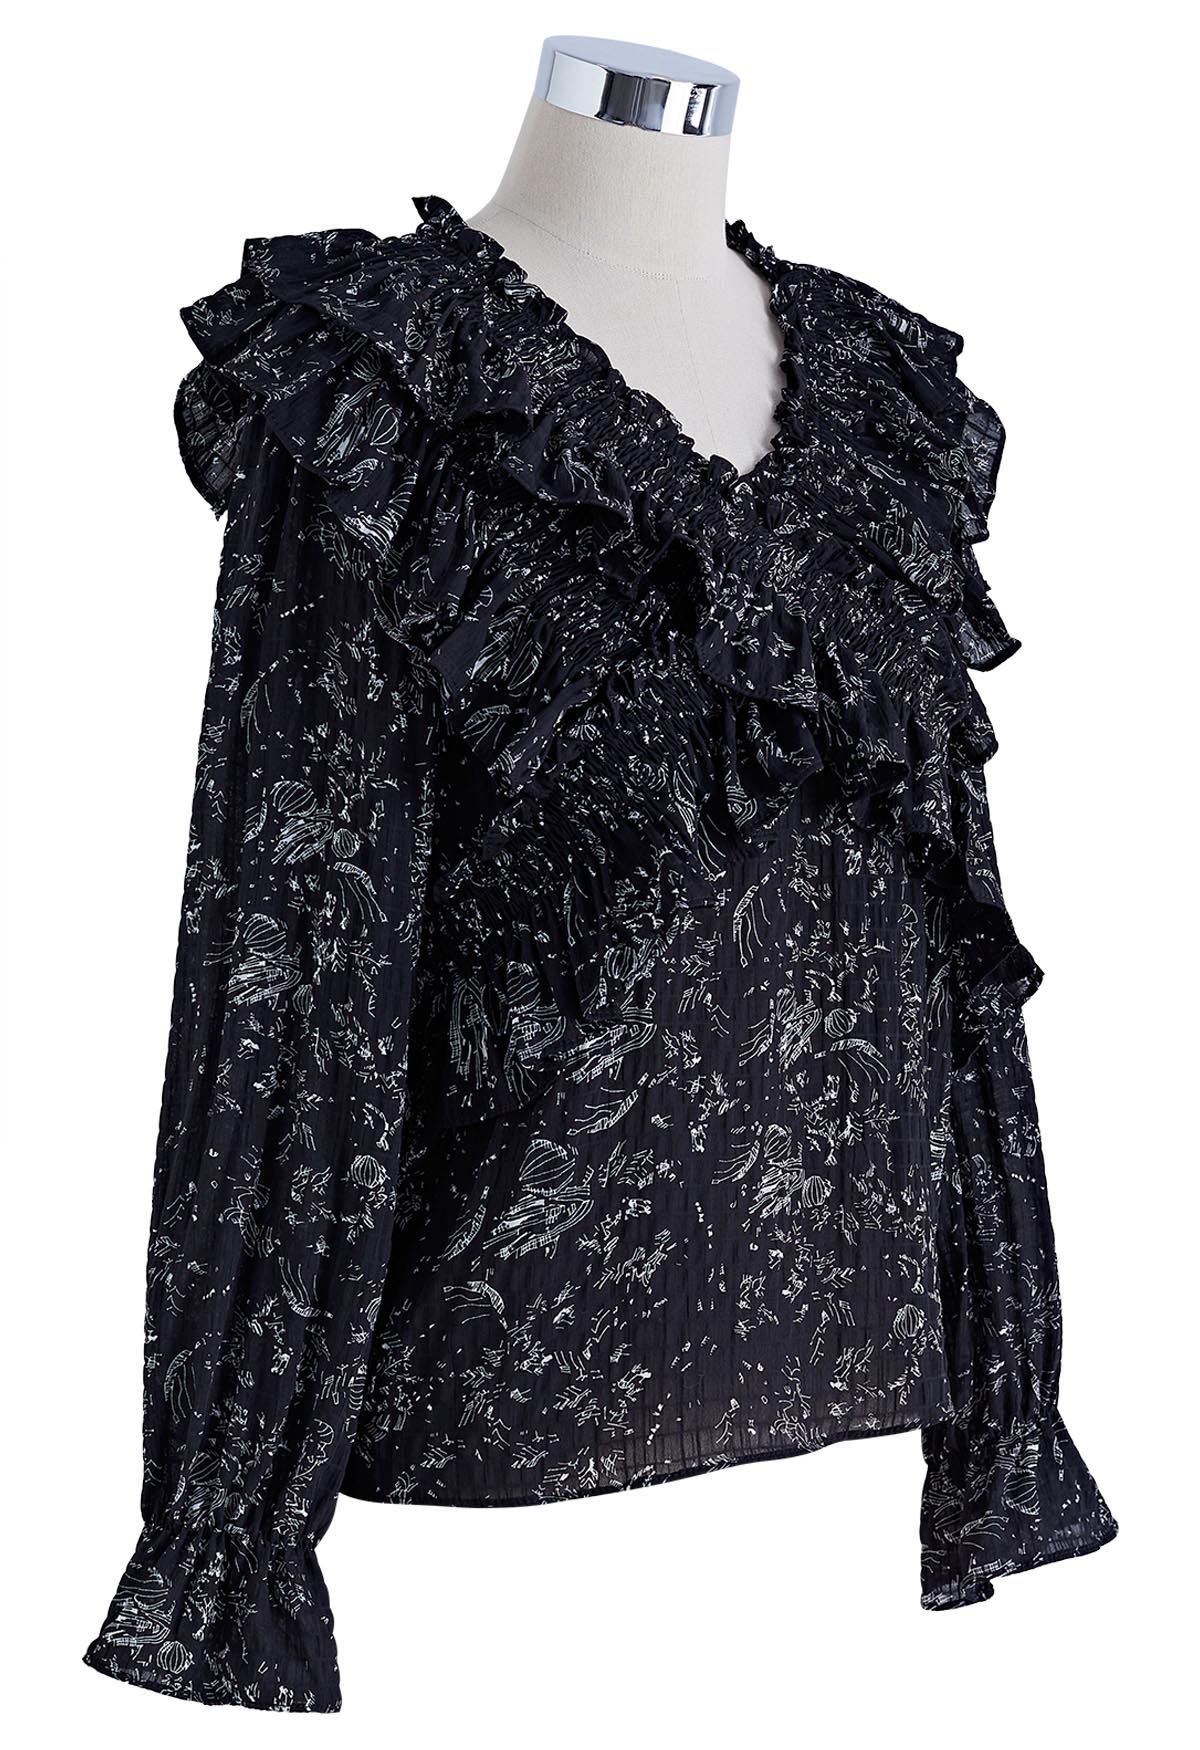 Abstract Print Cross Tiered Ruffled Top in Black